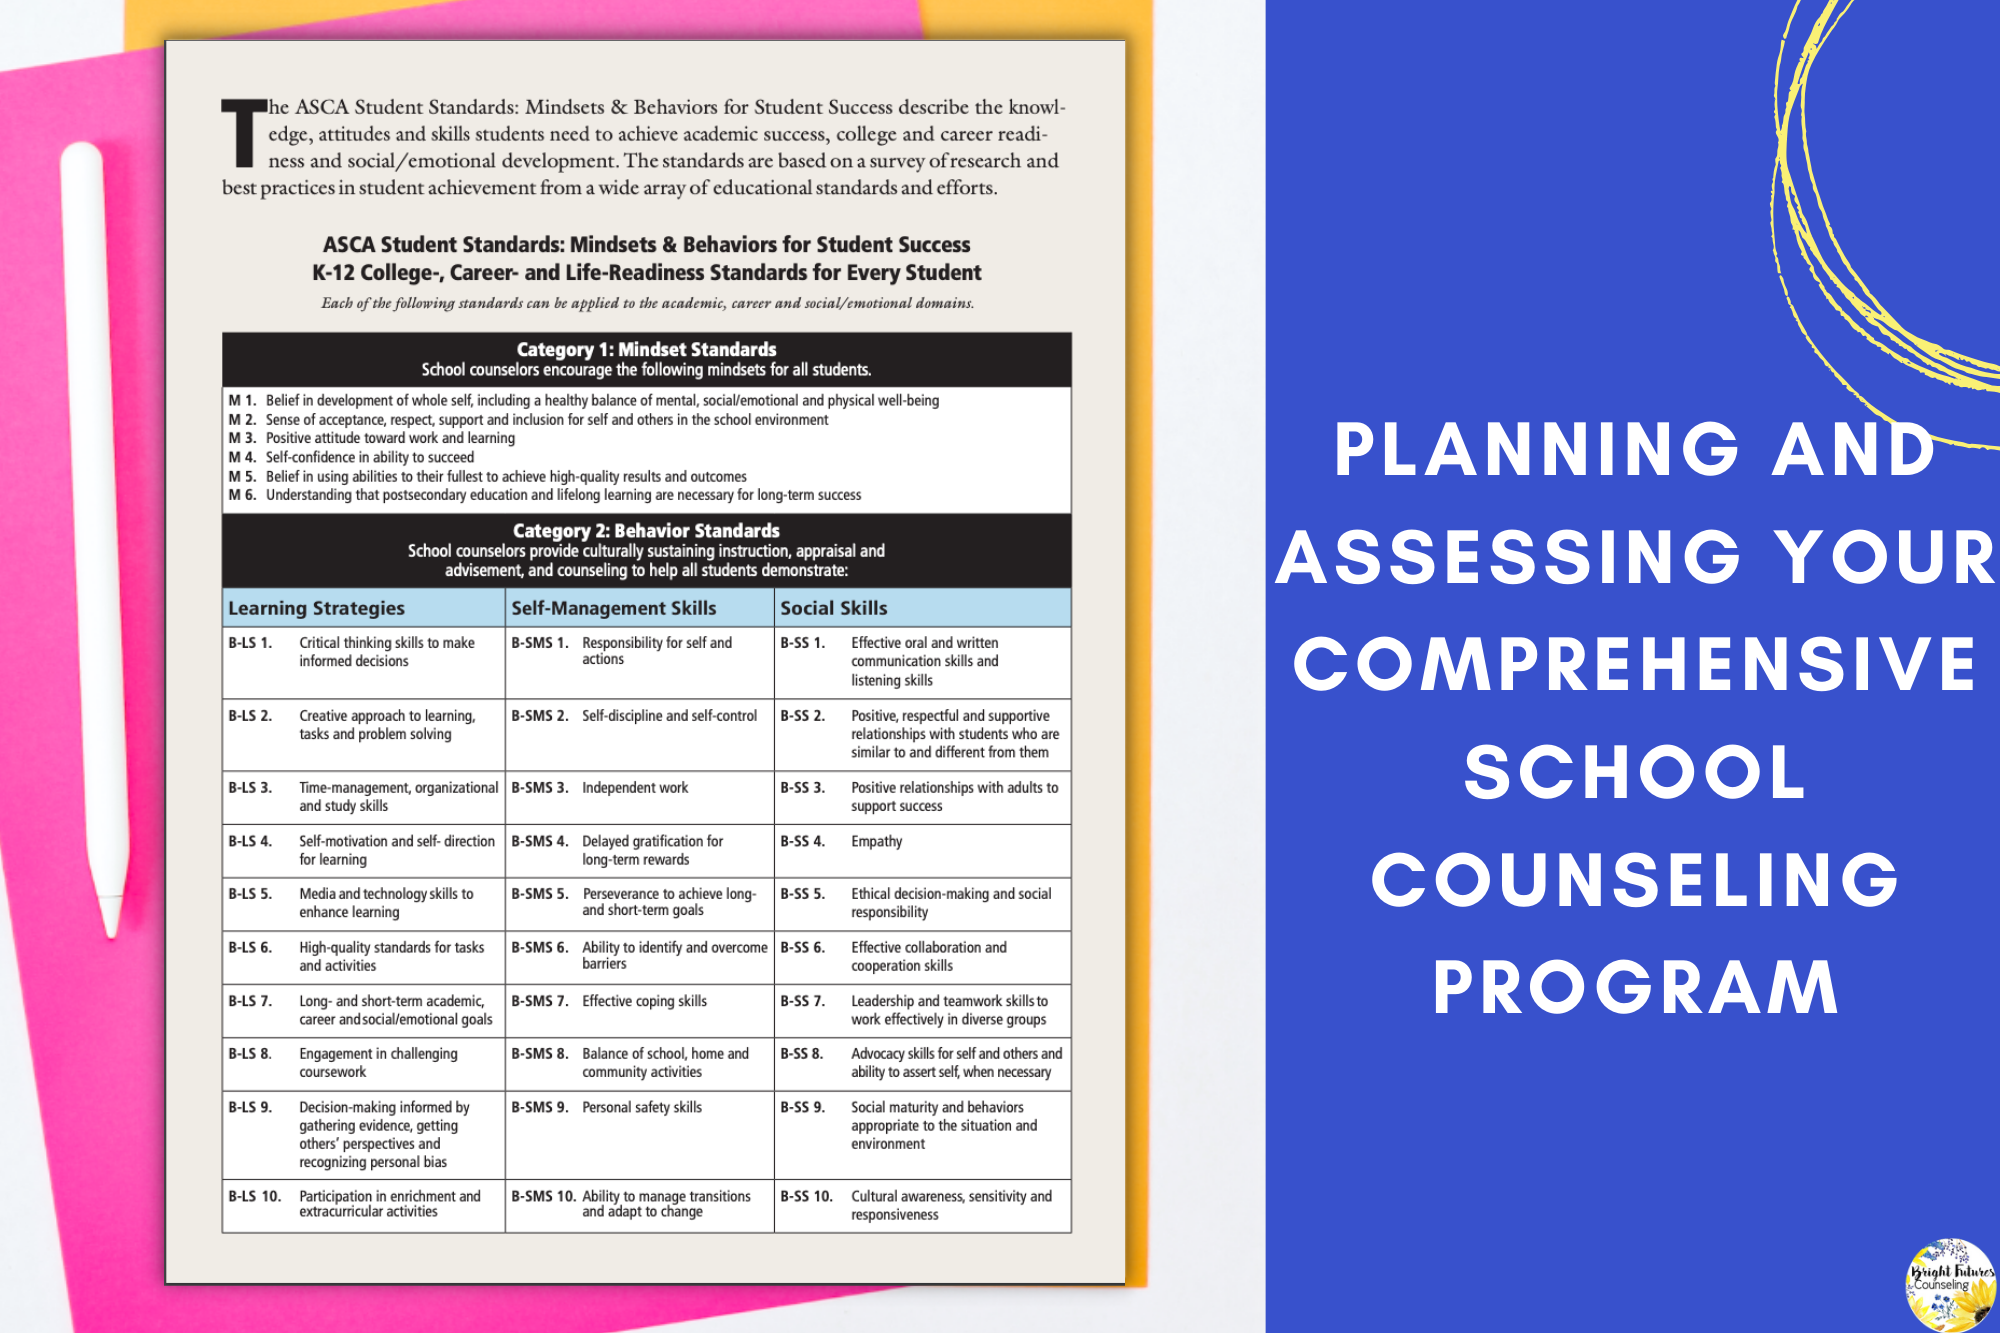 Planning and Assessing your Comprehensive School Counseling Program